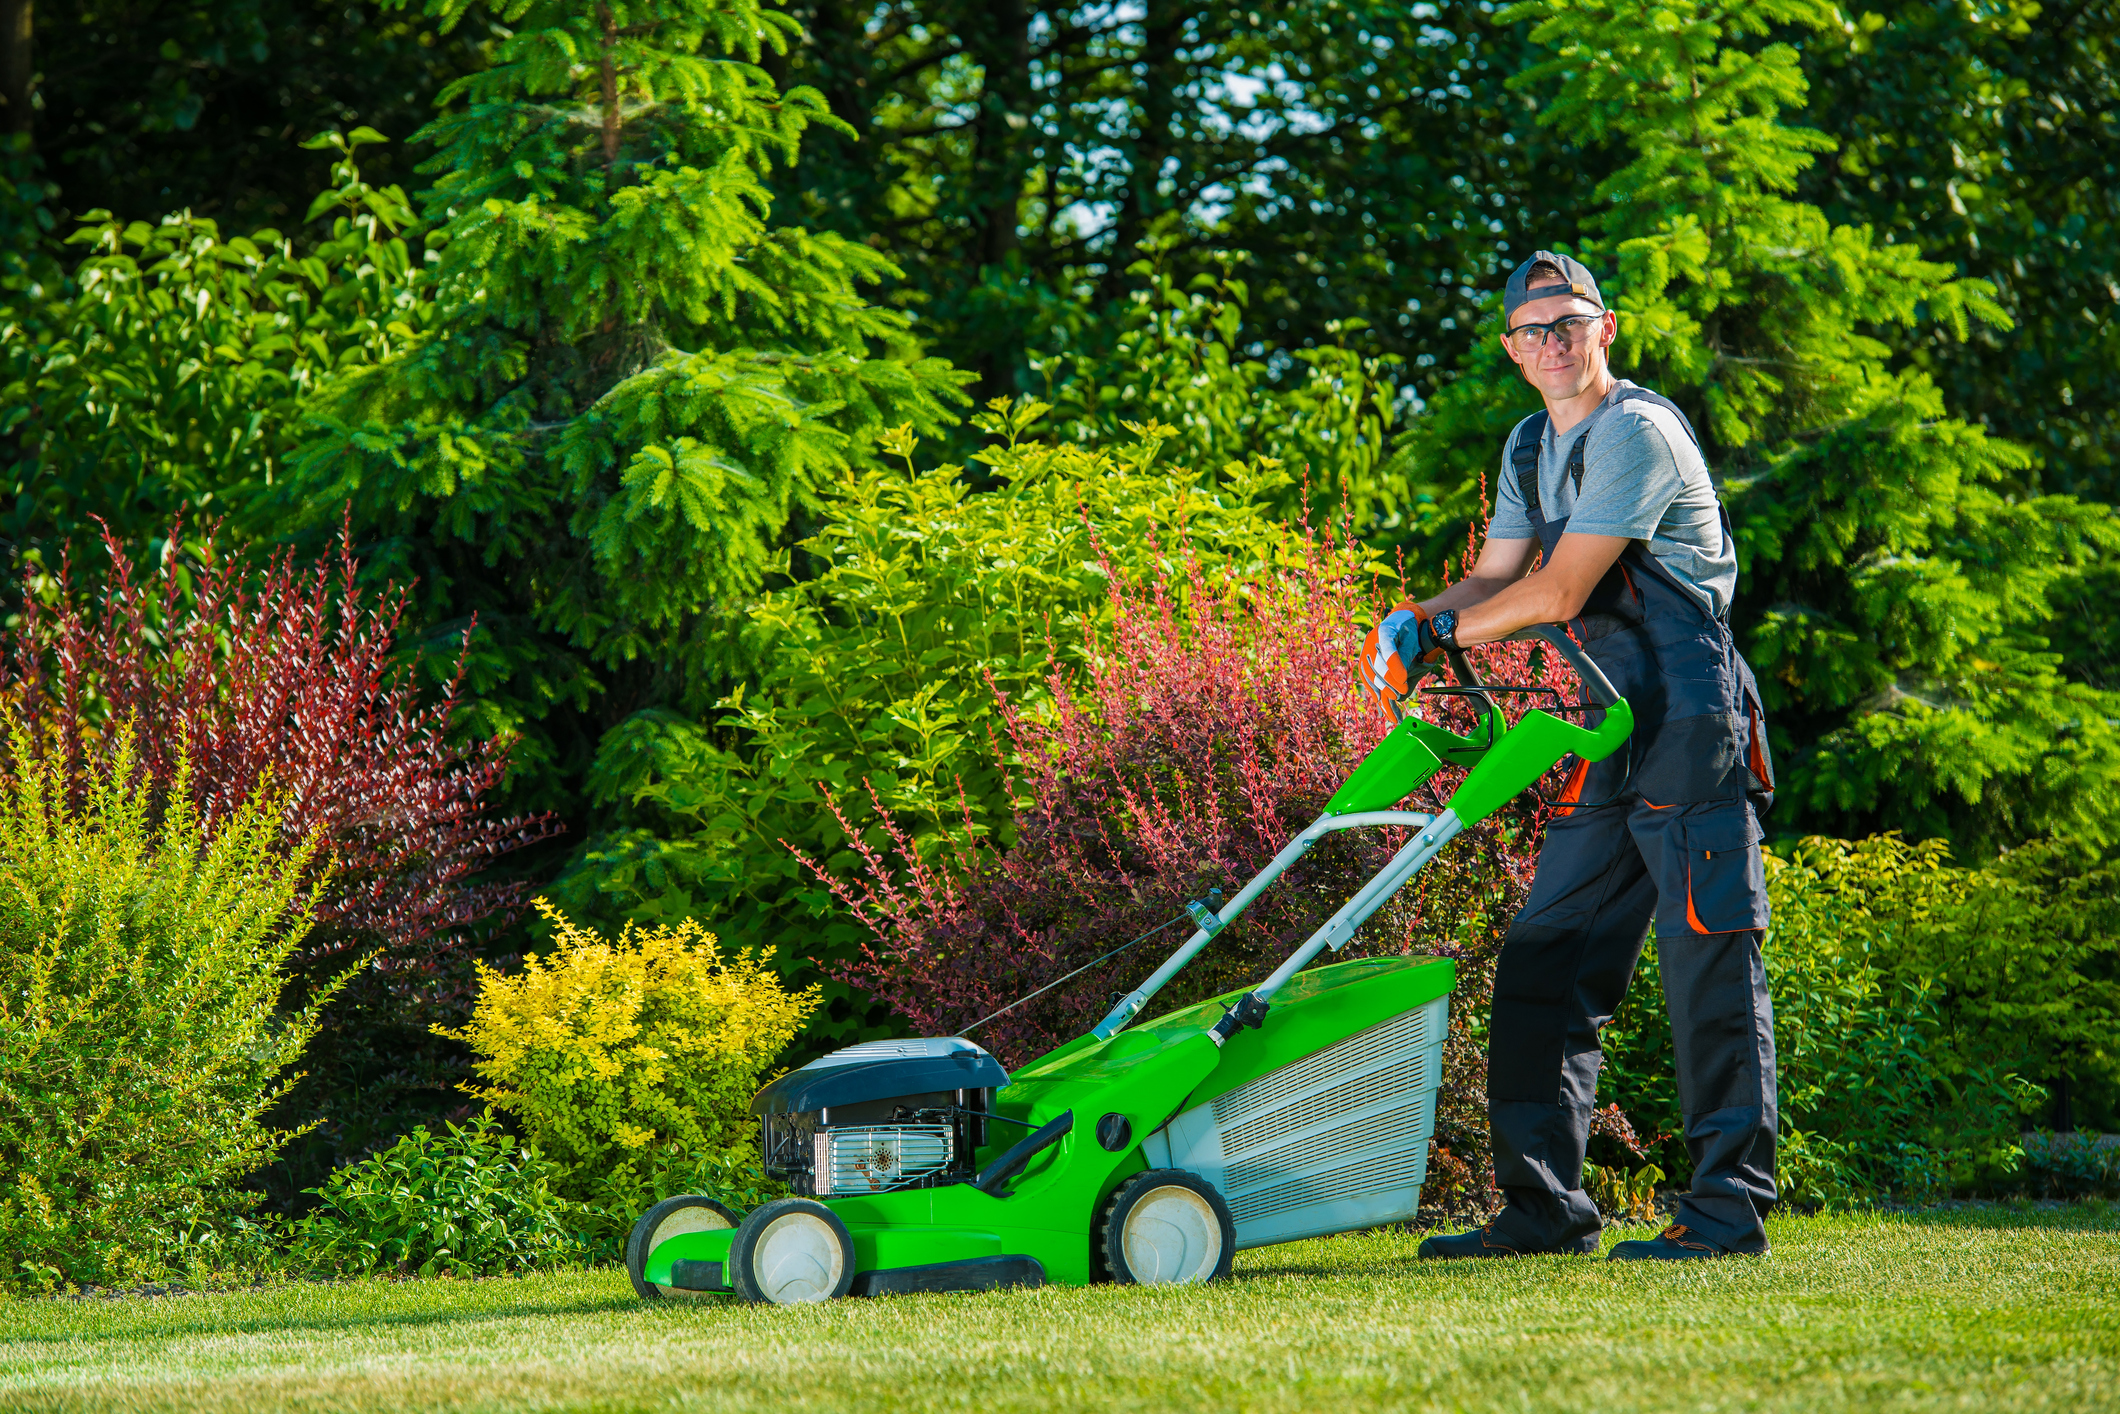 Landscapers: What you need to know to keep yourself and your